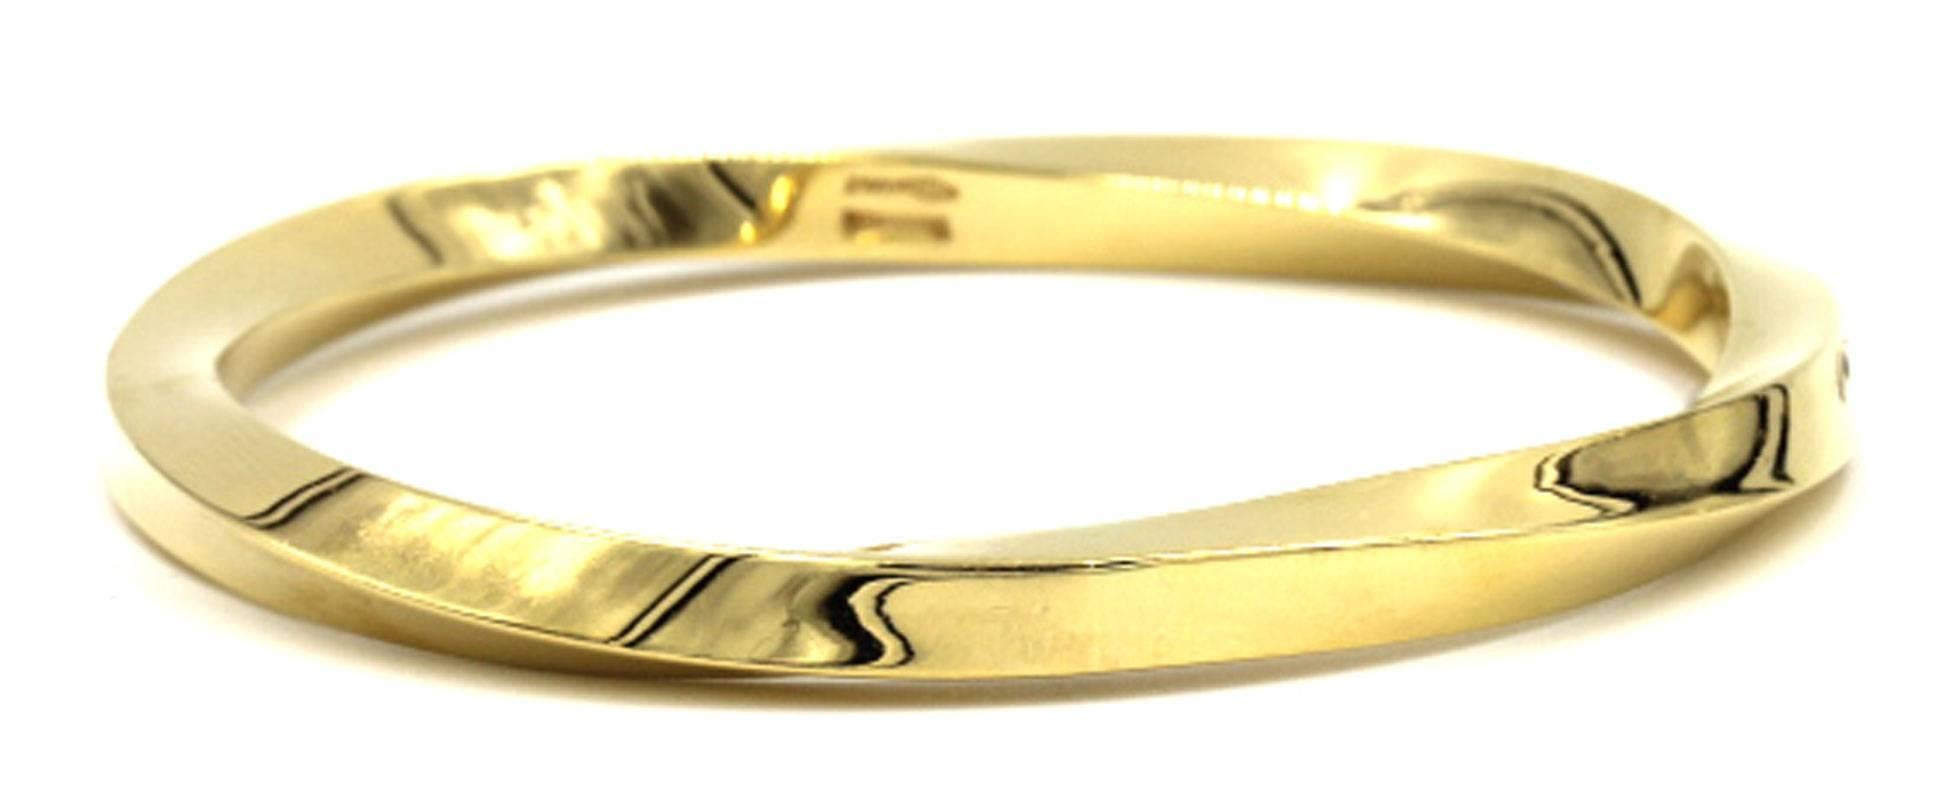 18 Karat yellow gold classic twist bracelet by Tiffany & Company. The bangle is 6.6 mm thick, and fits a 7 inch wrist comfortably. The bracelet is stamped Tiffany & Co 750 Italy.